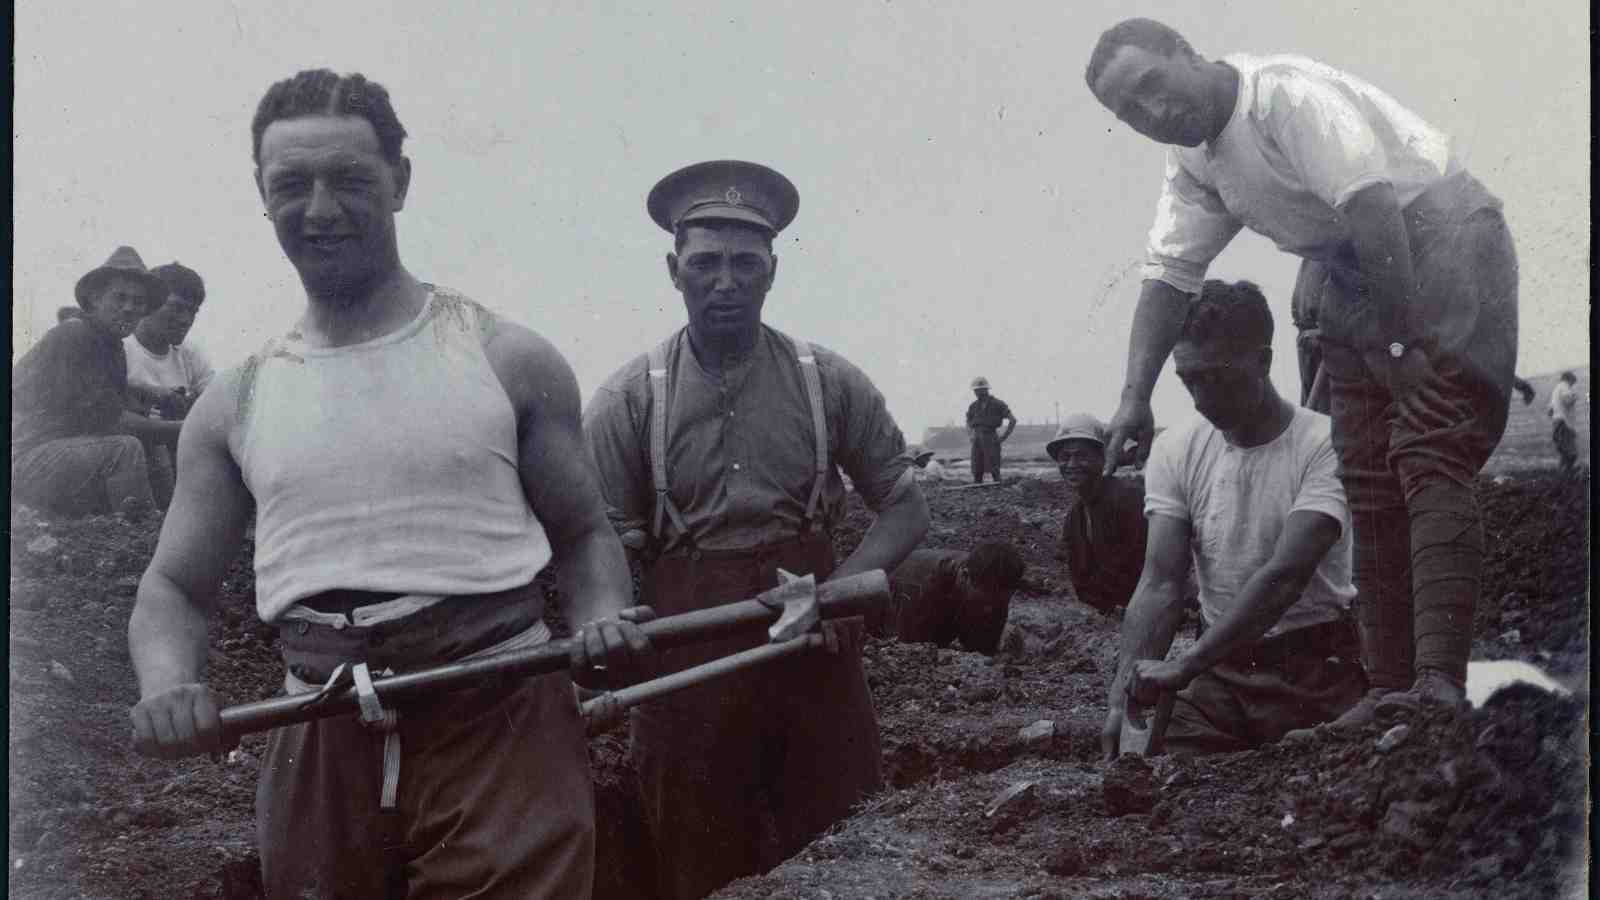 Peter Buck, and other World War I, Pioneer Battalion soldiers, digging a trench in Malta.